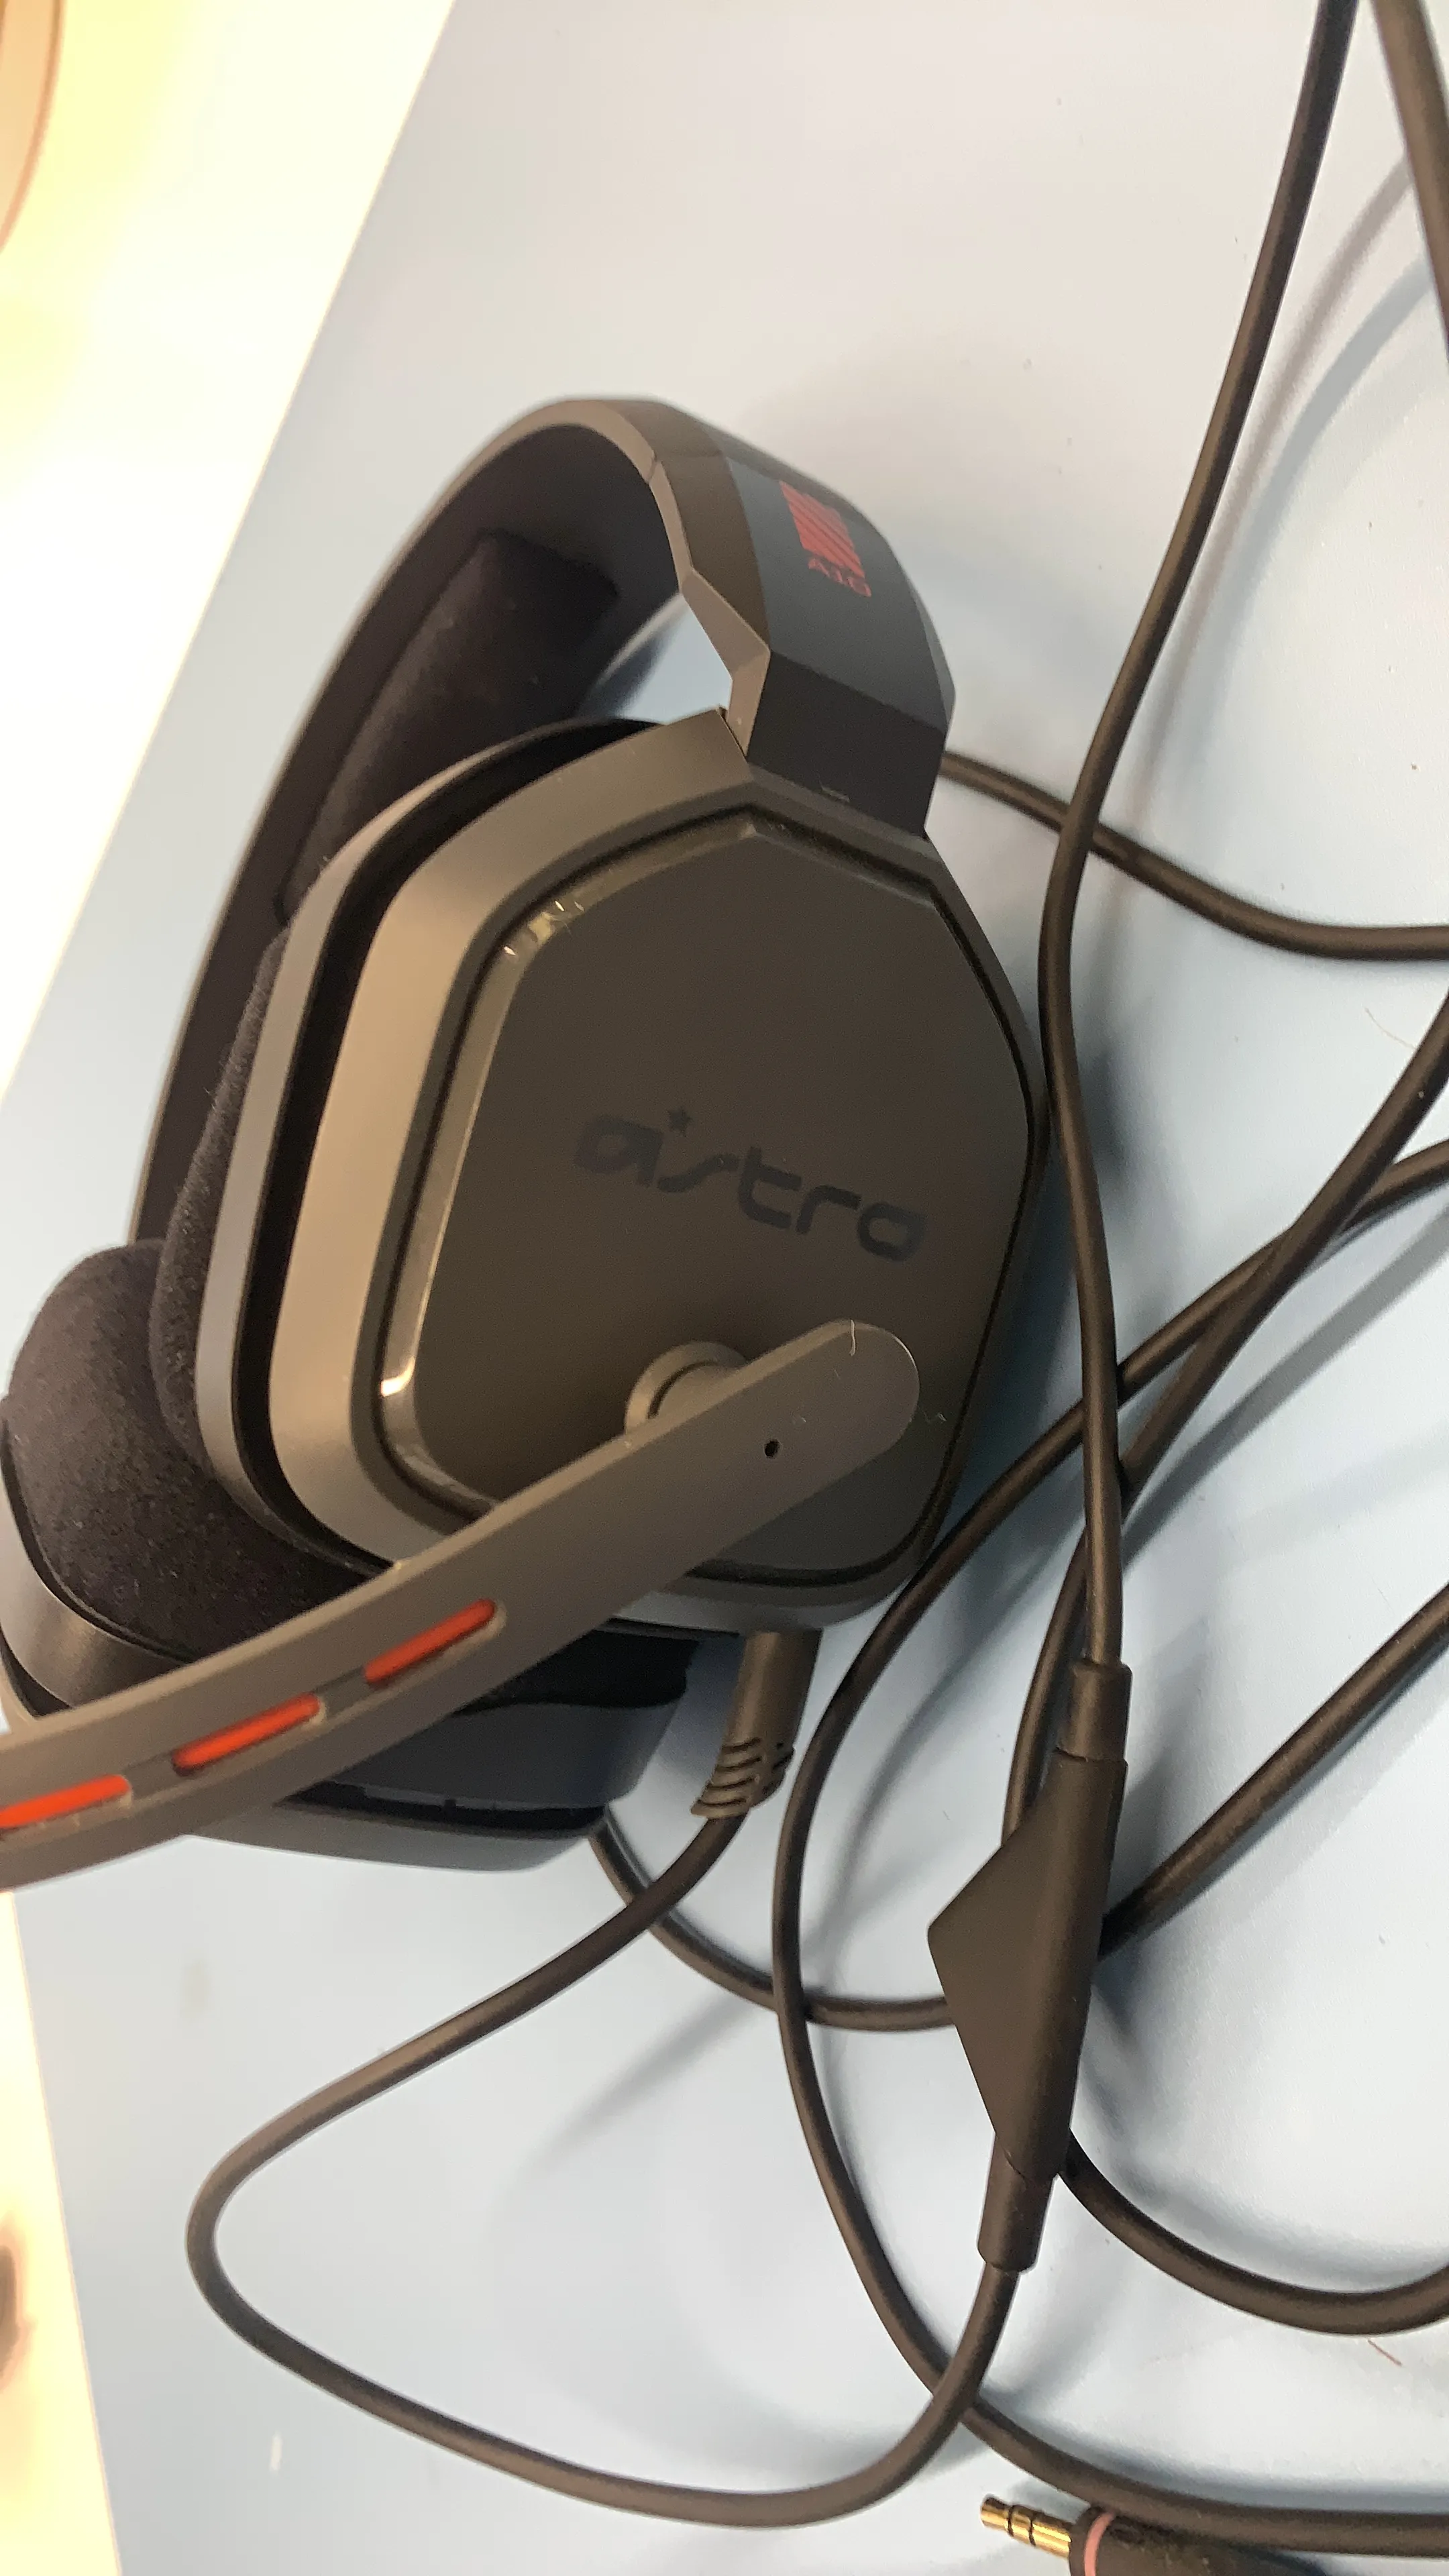 Astro A10 Gaming Headset - Gray/Red media